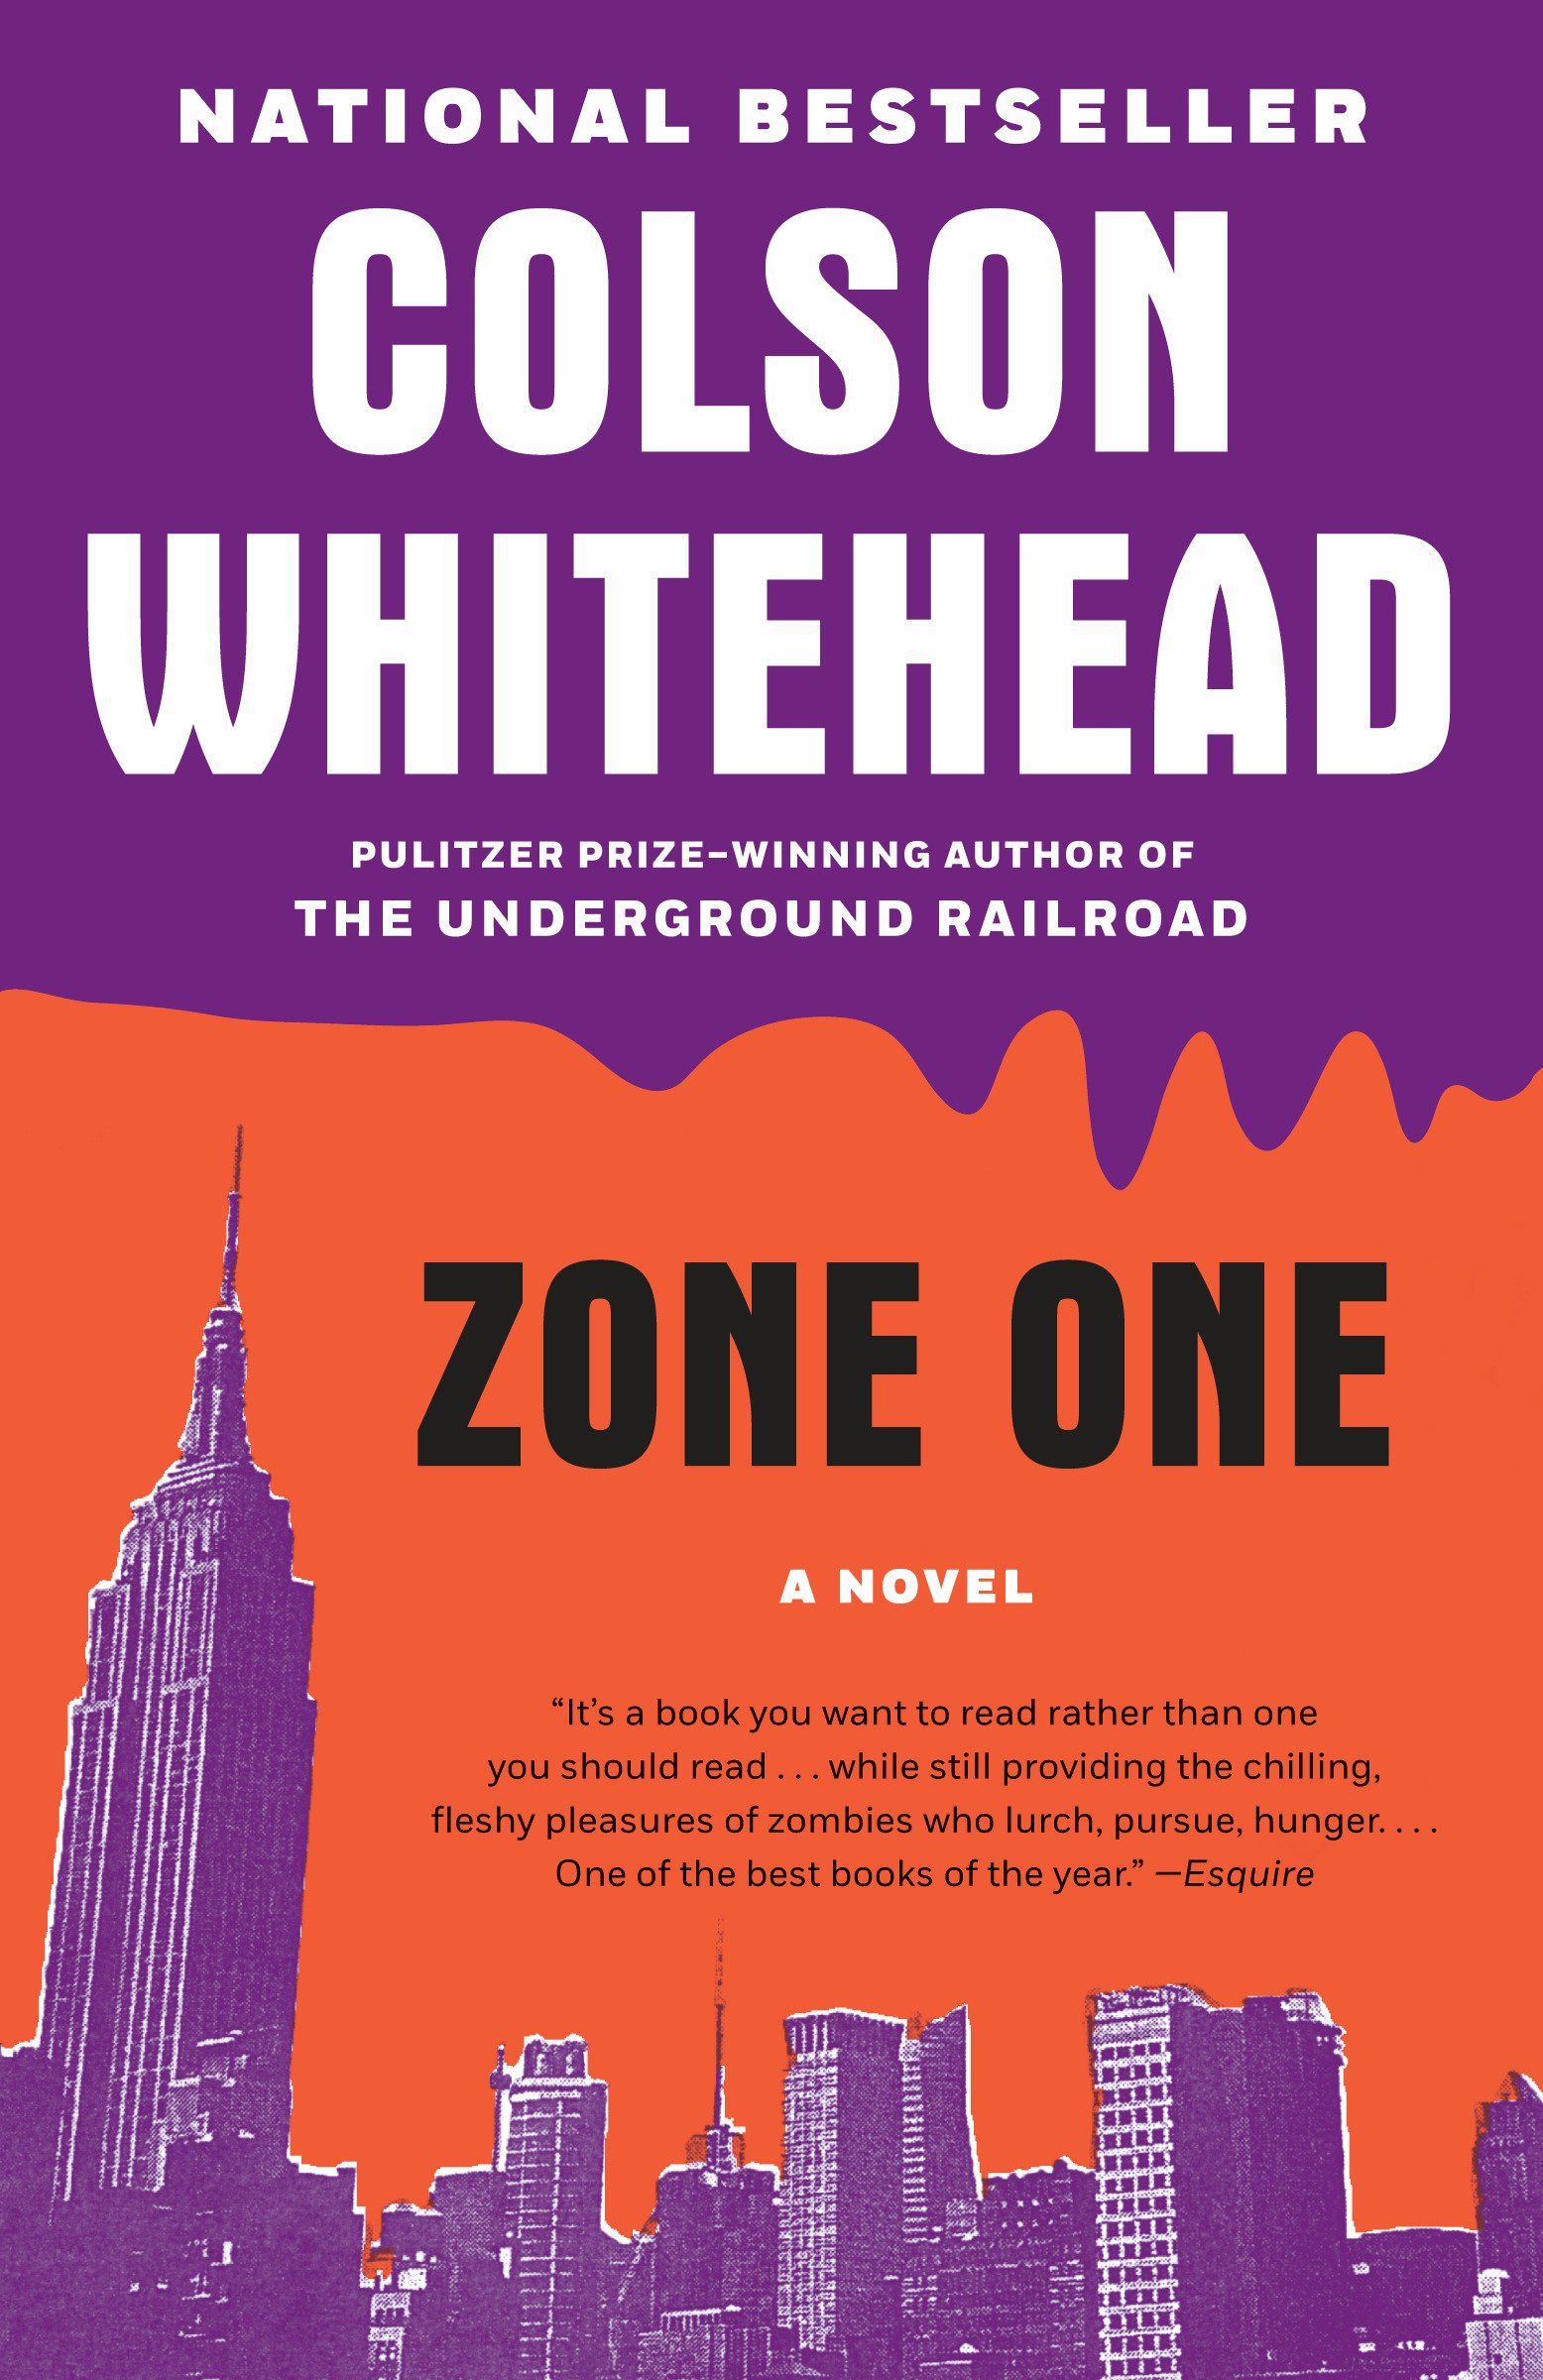 A graphic of the cover of Zone One by Colson Whitehead